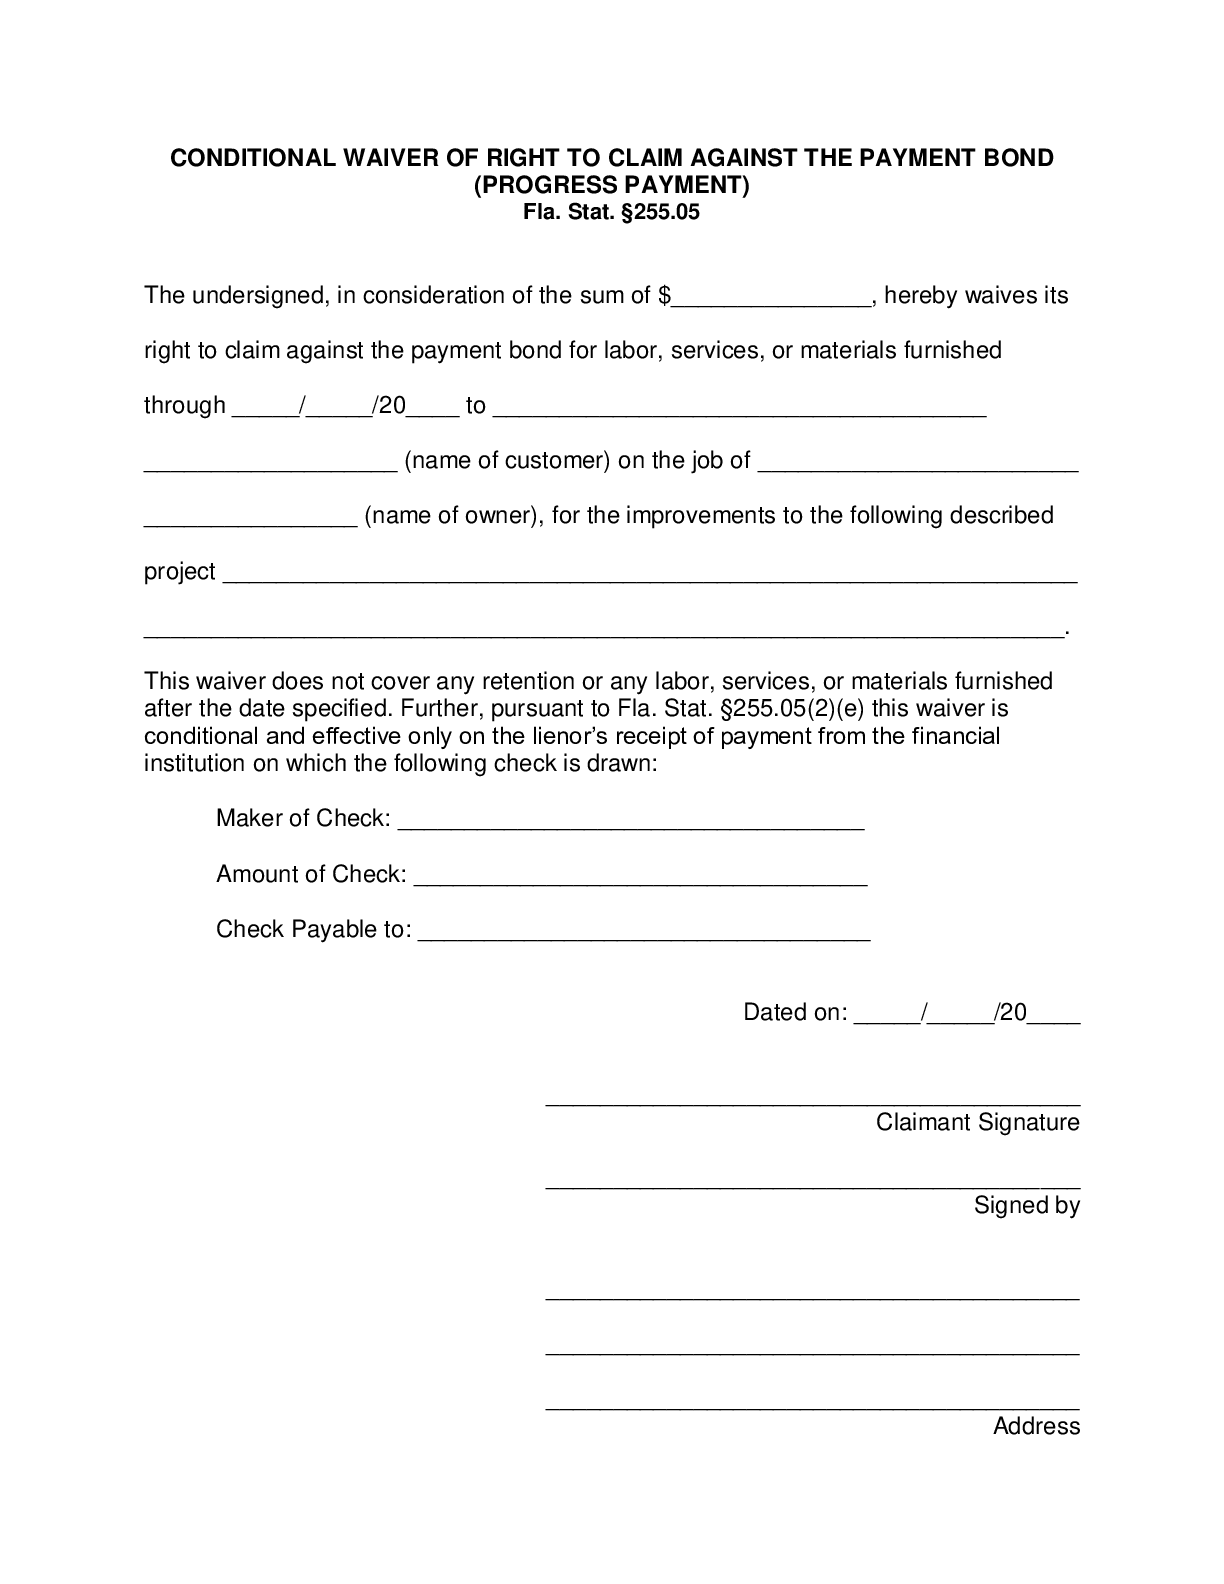 Florida Partial Conditional Bond Waiver Form | Free Template Download - free from